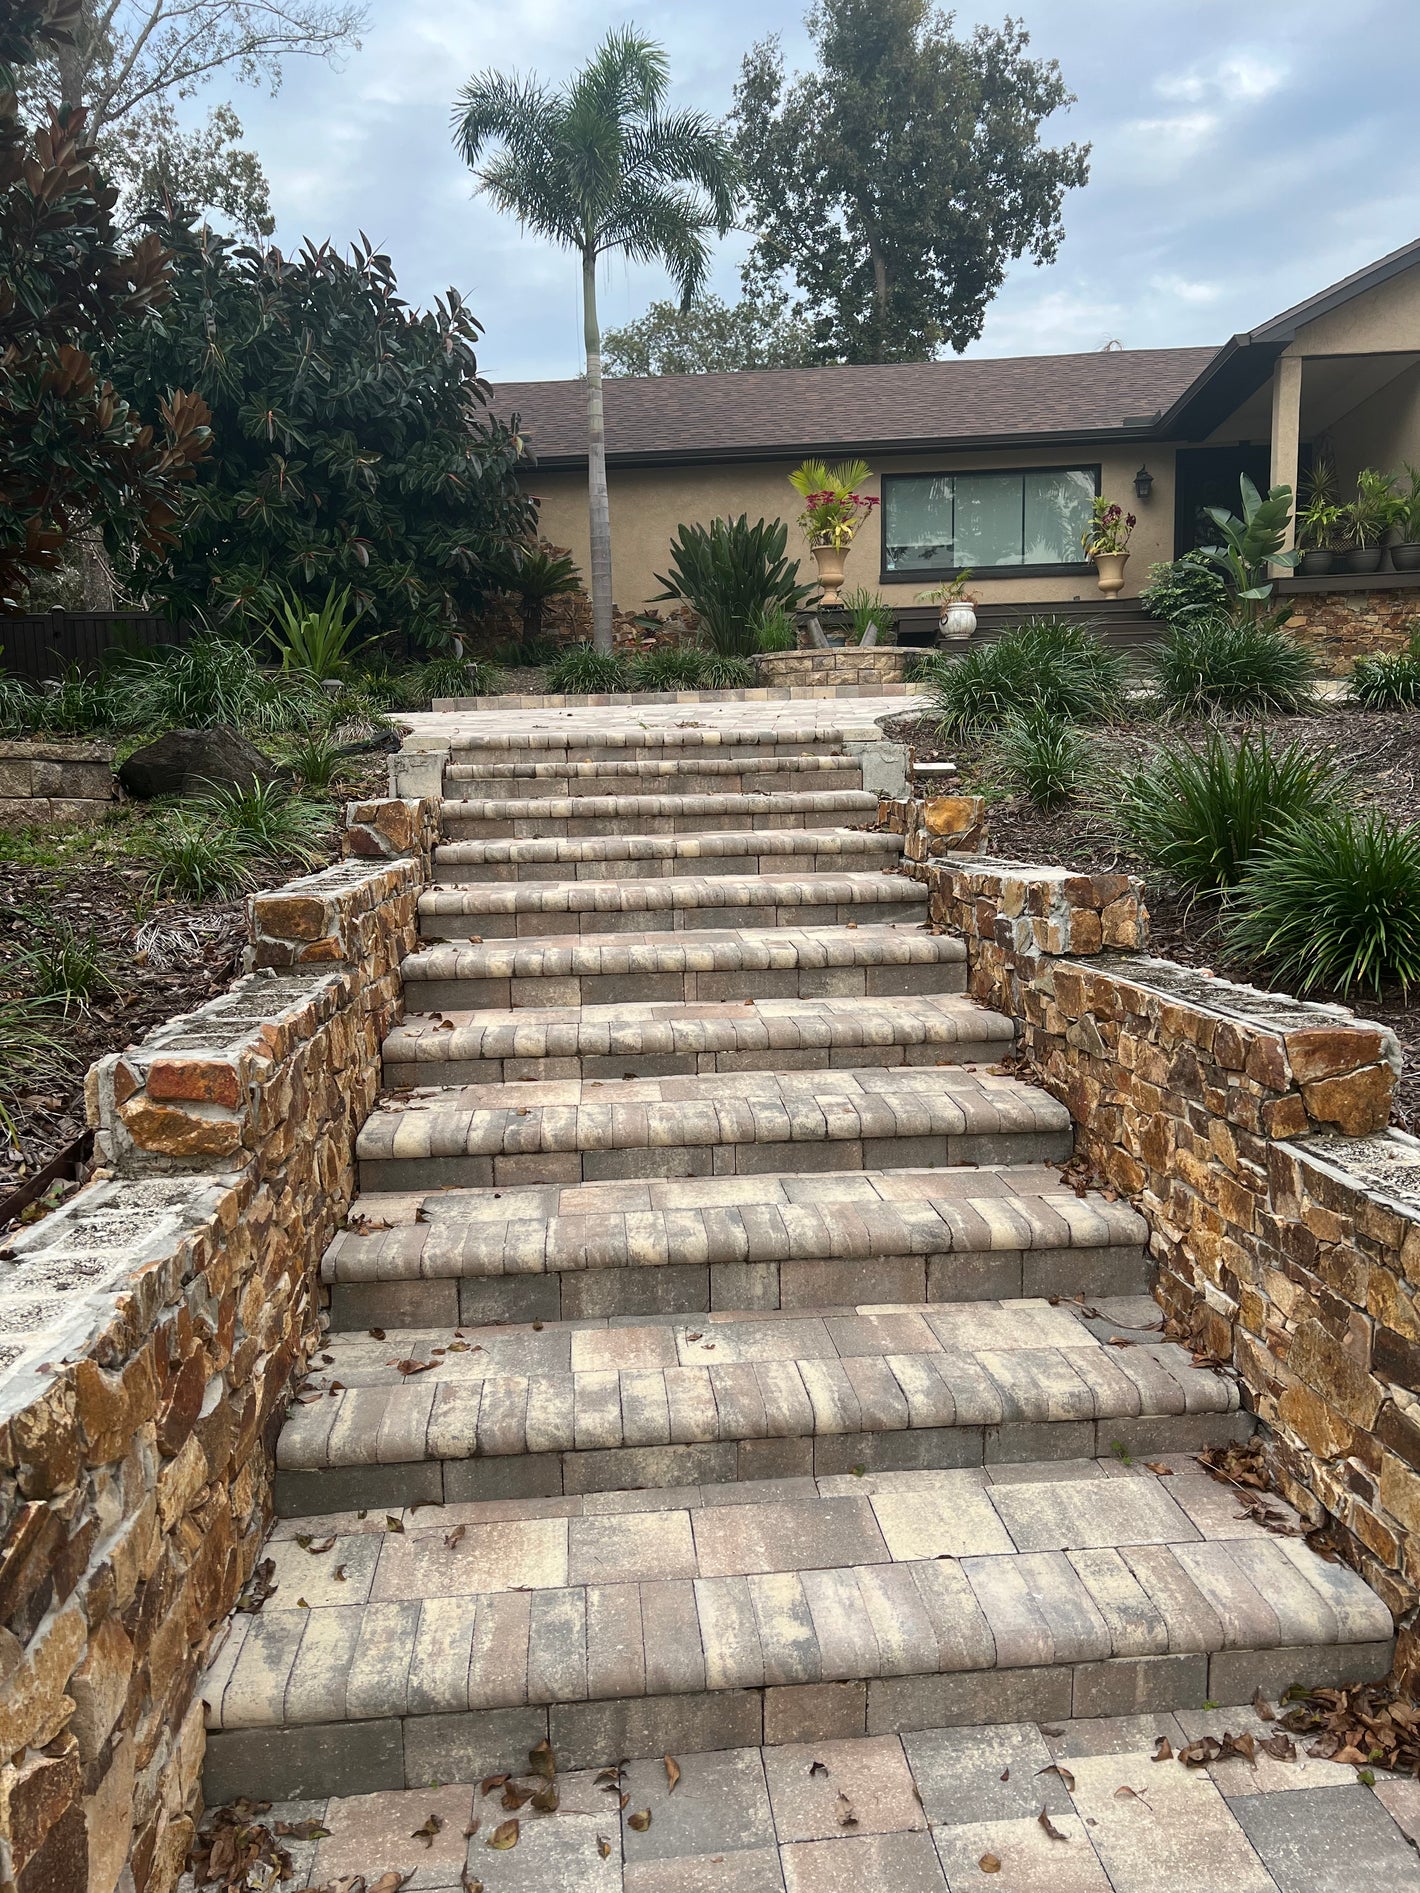 Paver steps leading up to house